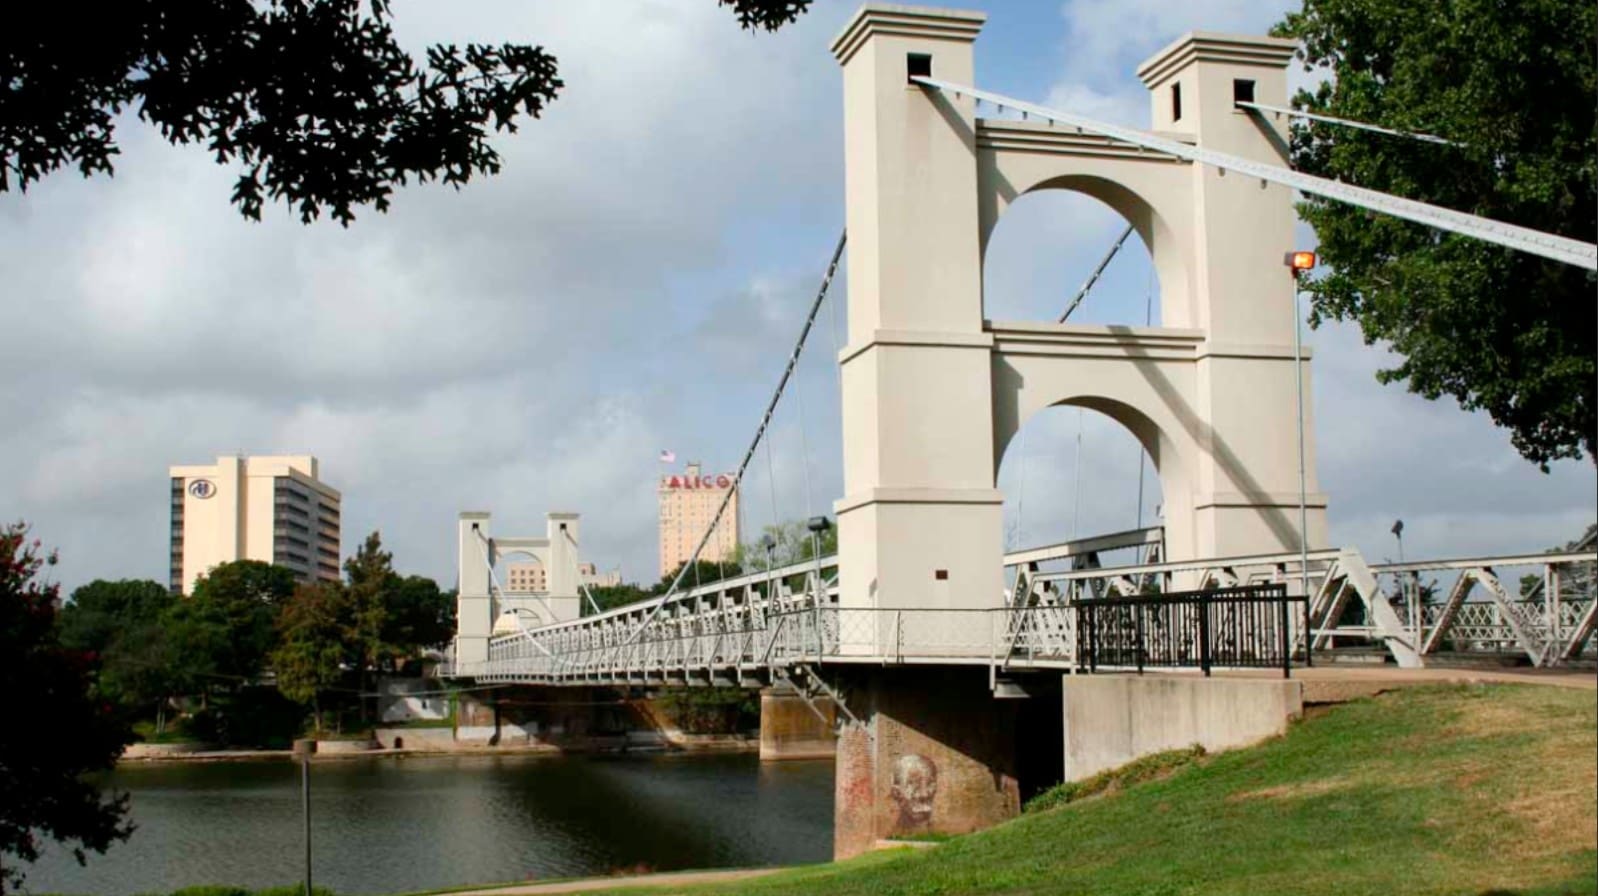 A captivating image of the famous Waco Suspension Bridge, with its historic architecture and vibrant riverfront park, symbolizing Waco's rich history and its modern blend of culture and nature.